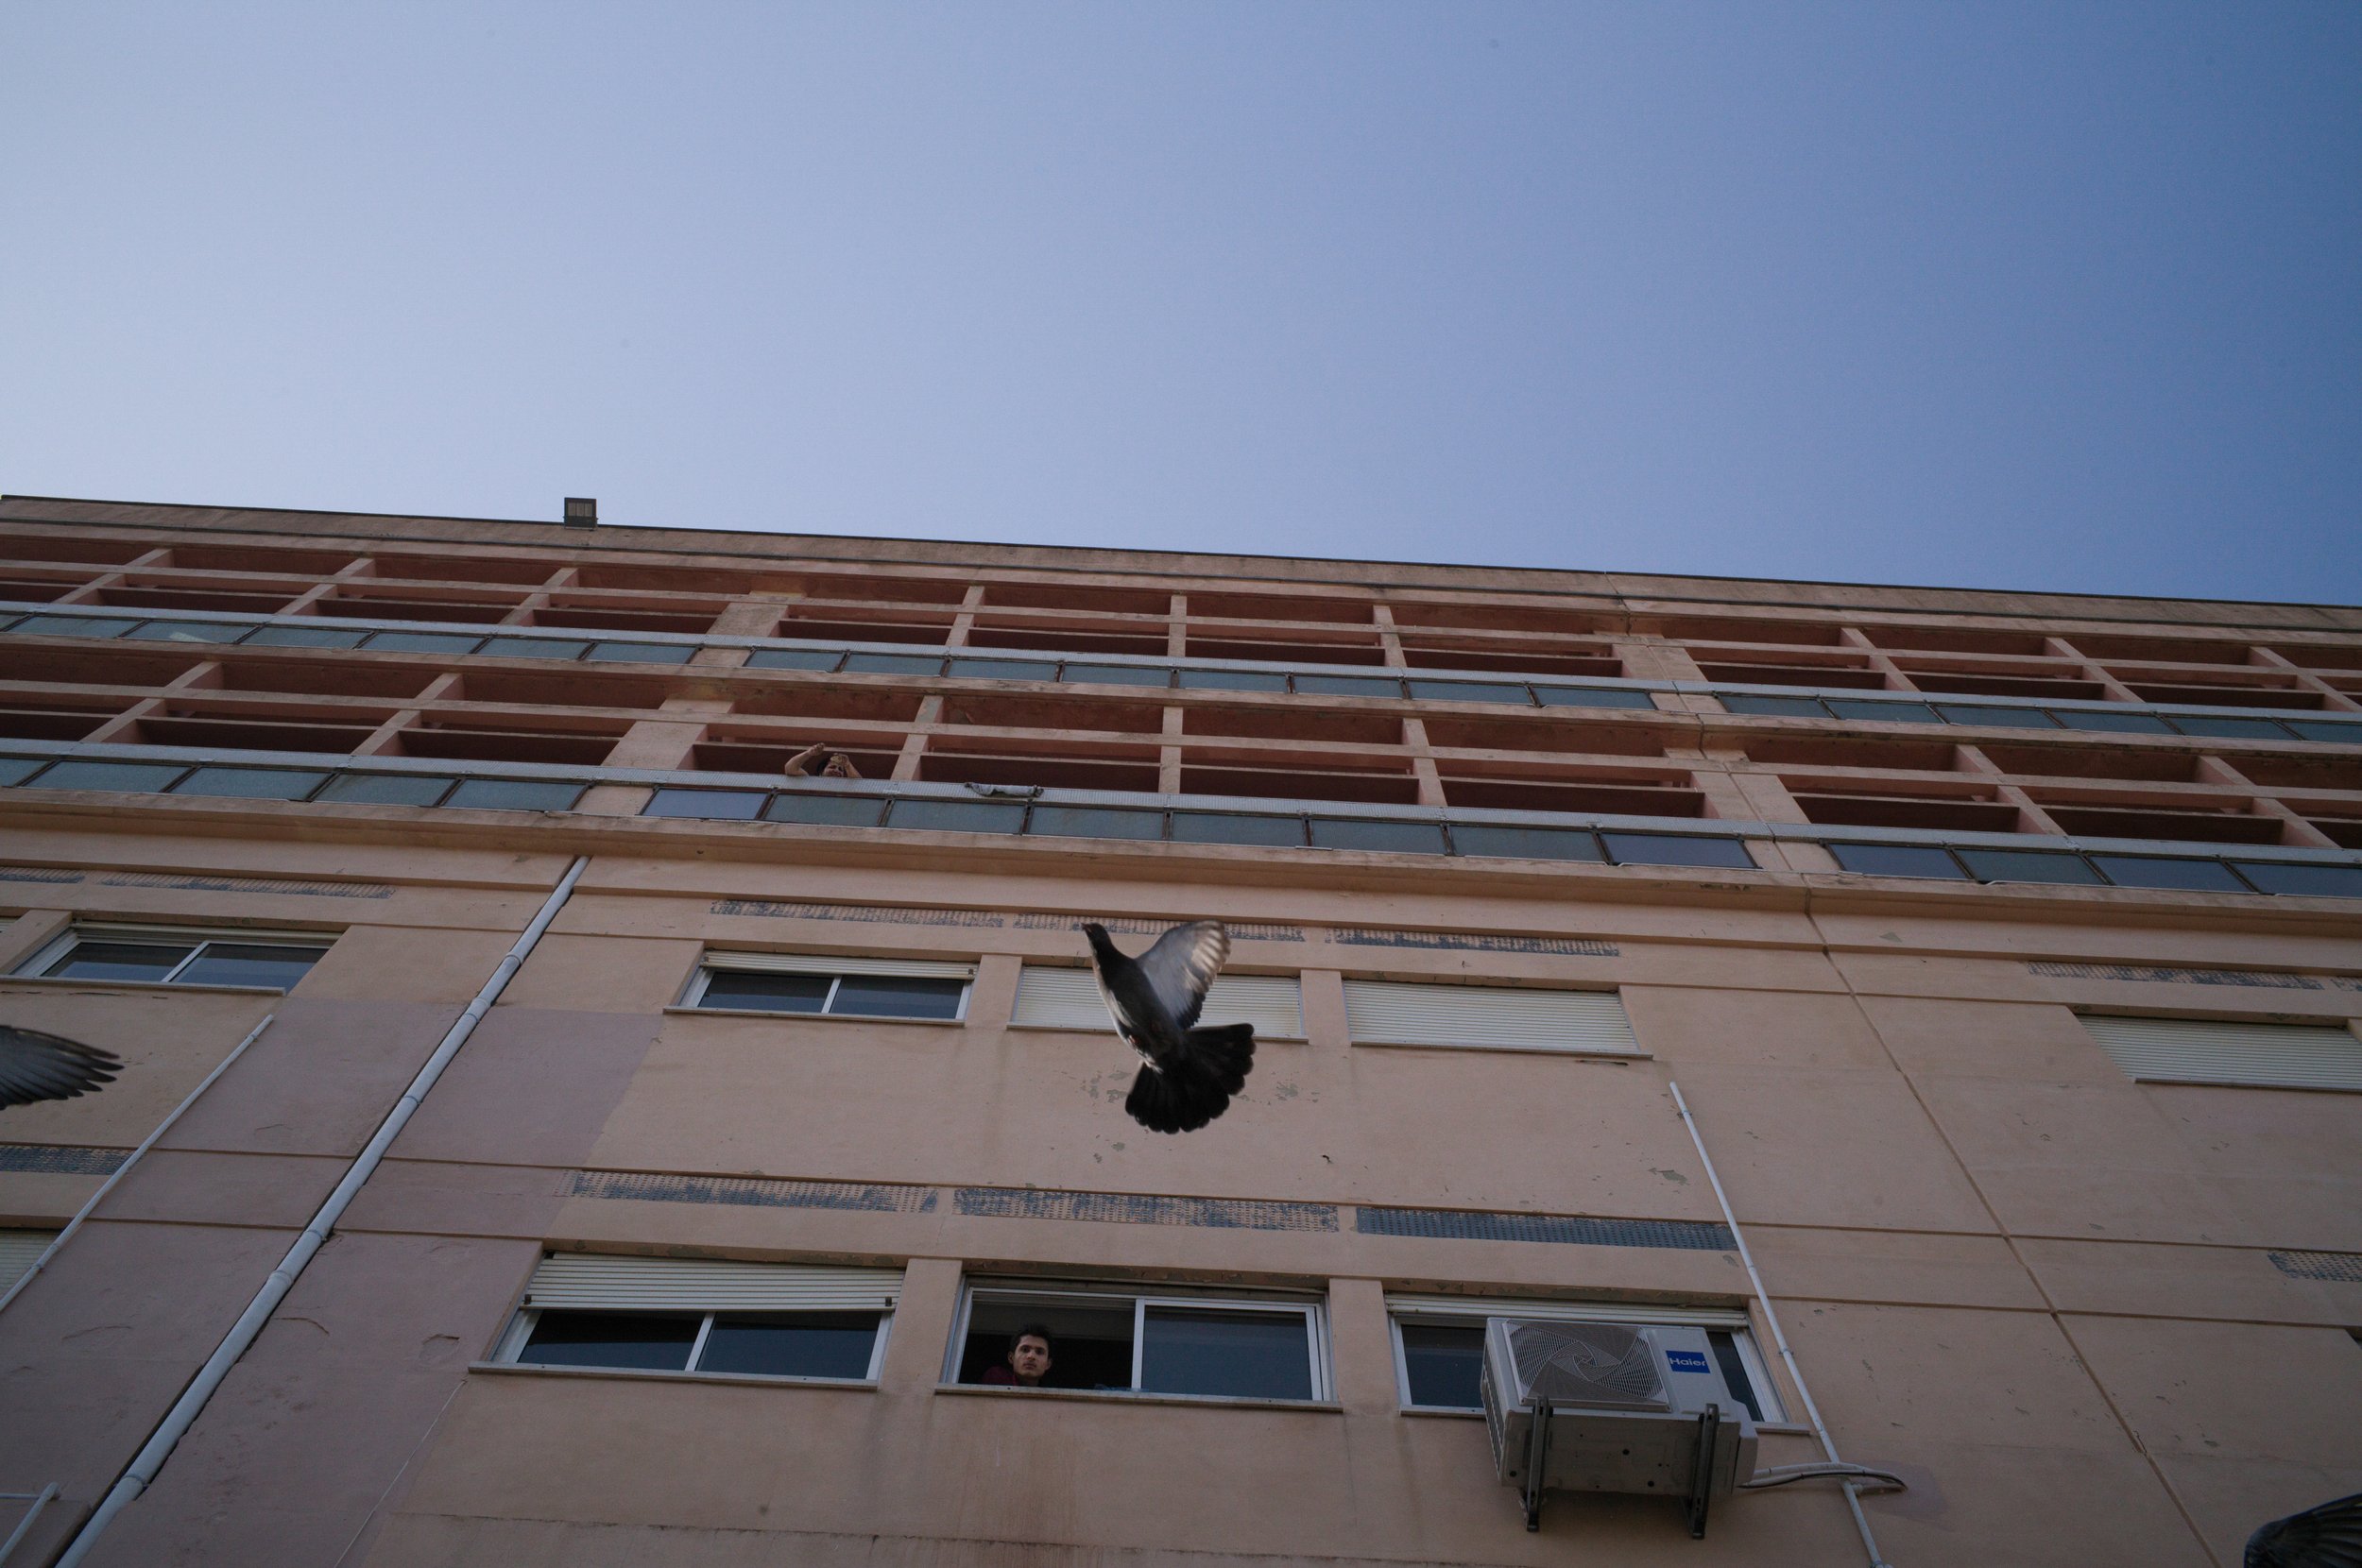  Pidgeons fly in the entrance to the former military Hospital of Ajuda, Lisbon, Portugal, where students and staff of the Afghanistan National Institute of Music lived in for 8 months. July 2022 